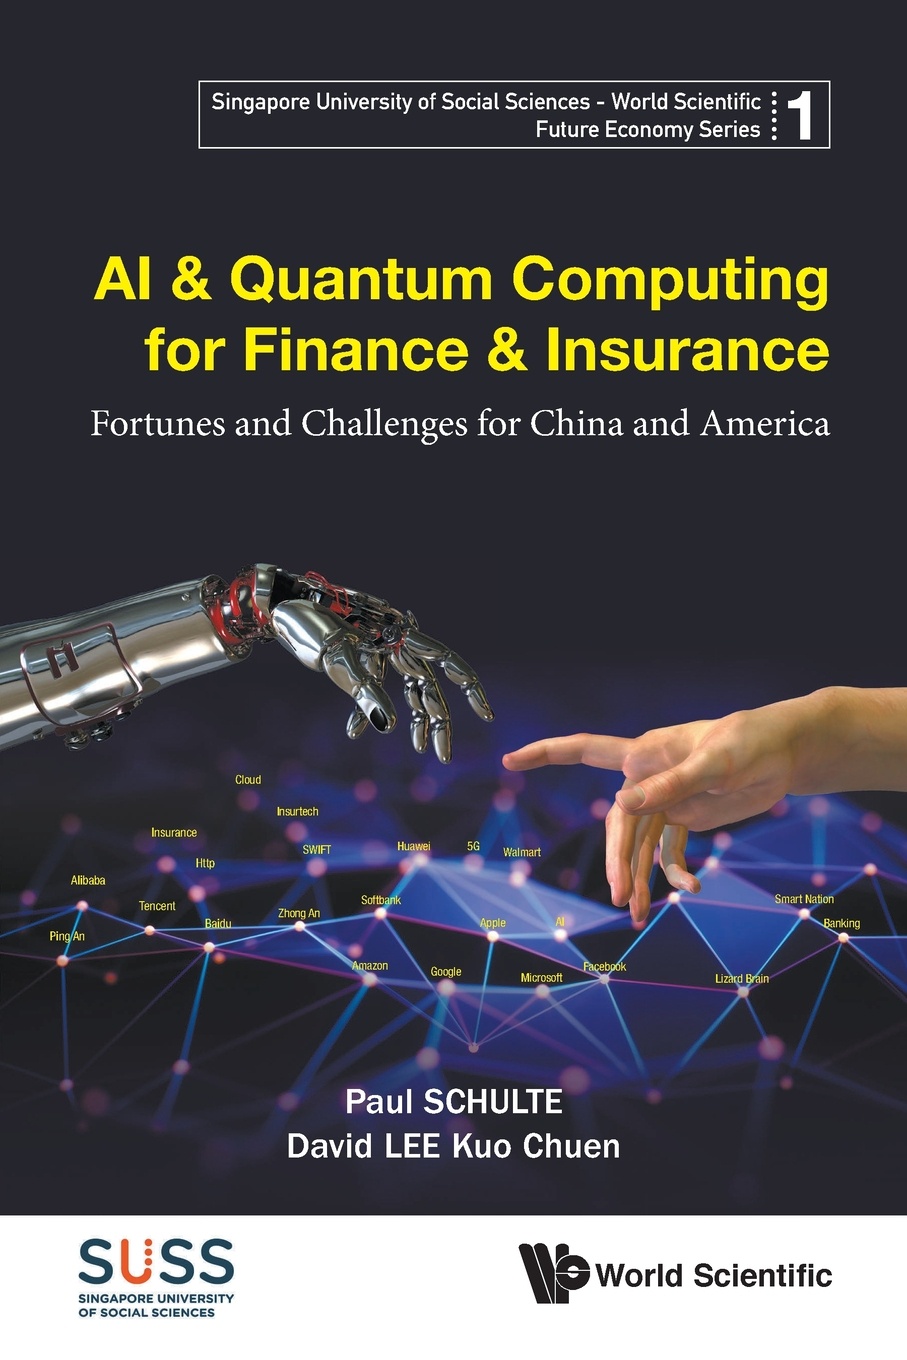 AI & Quantum Computing for Finance & Insurance. Fortunes and Challenges for China and America